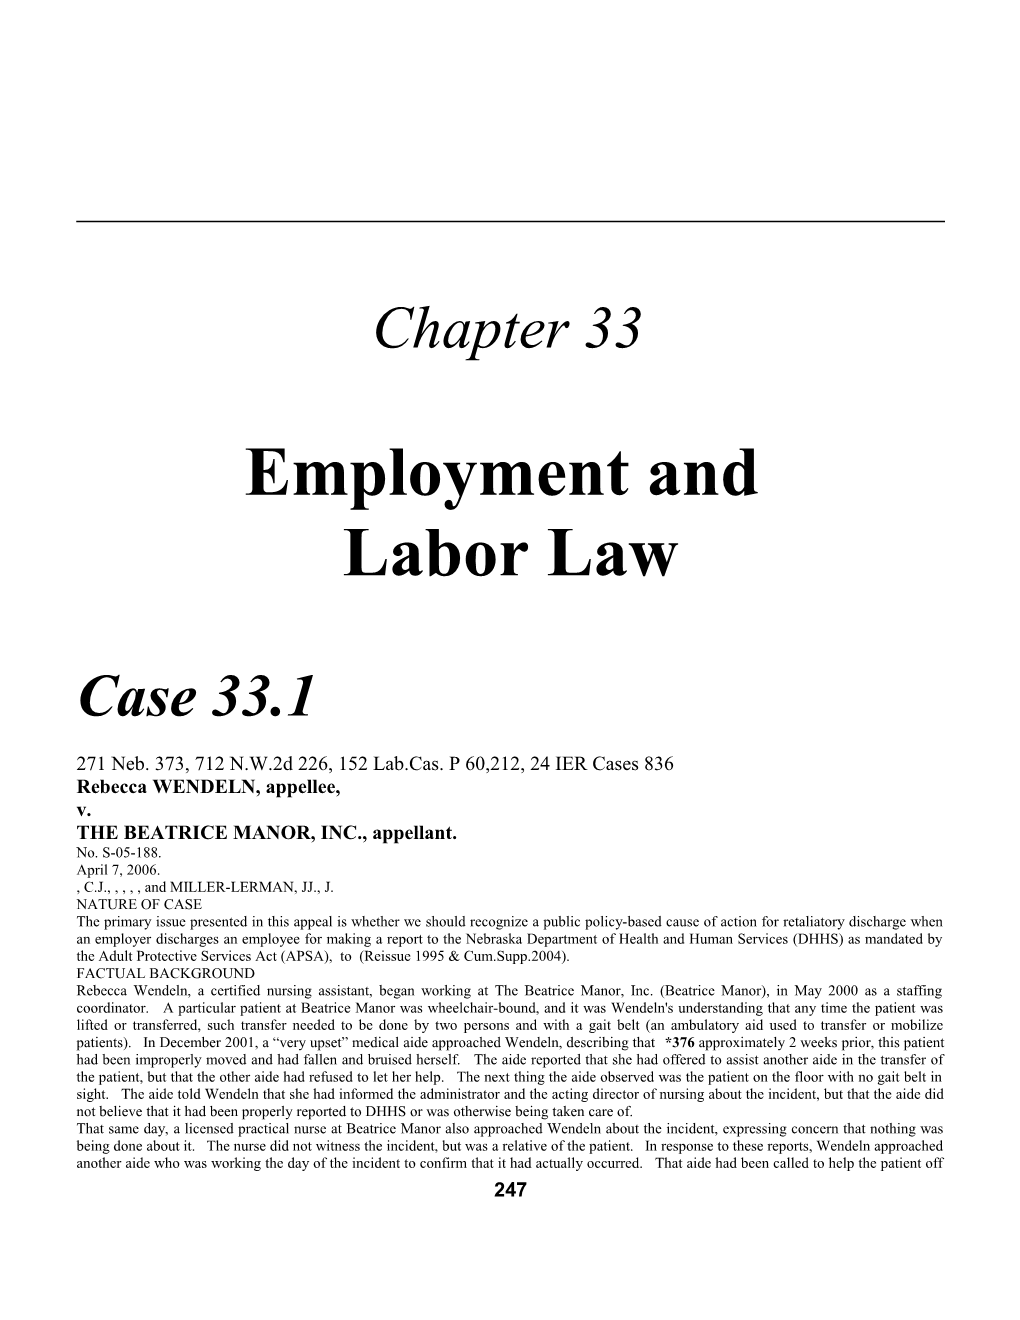 Chapter 33: Employment and Labor Law 523